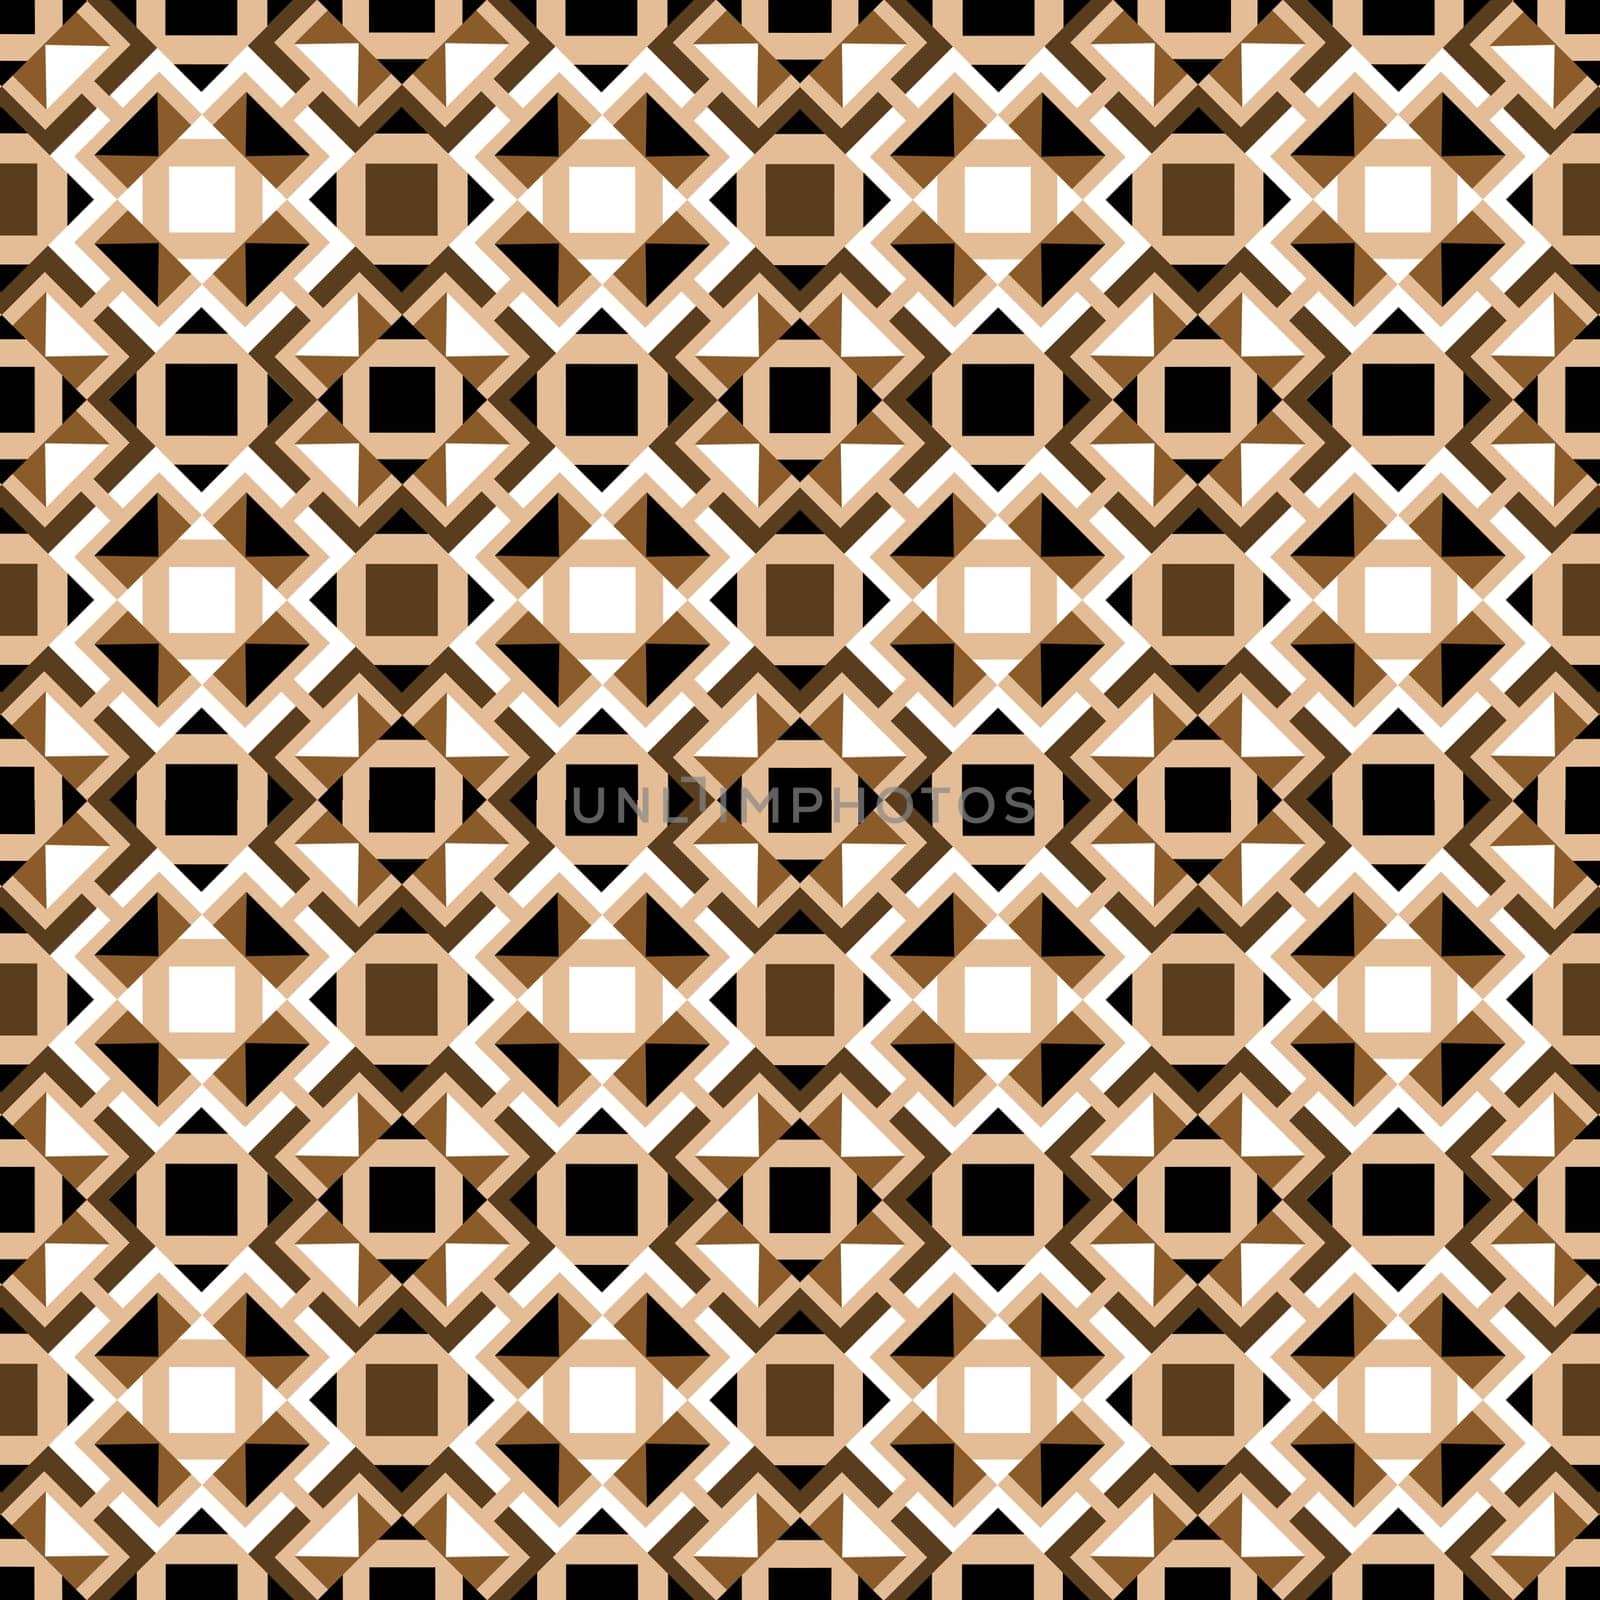 Geometric seamless pattern in brown and white tones